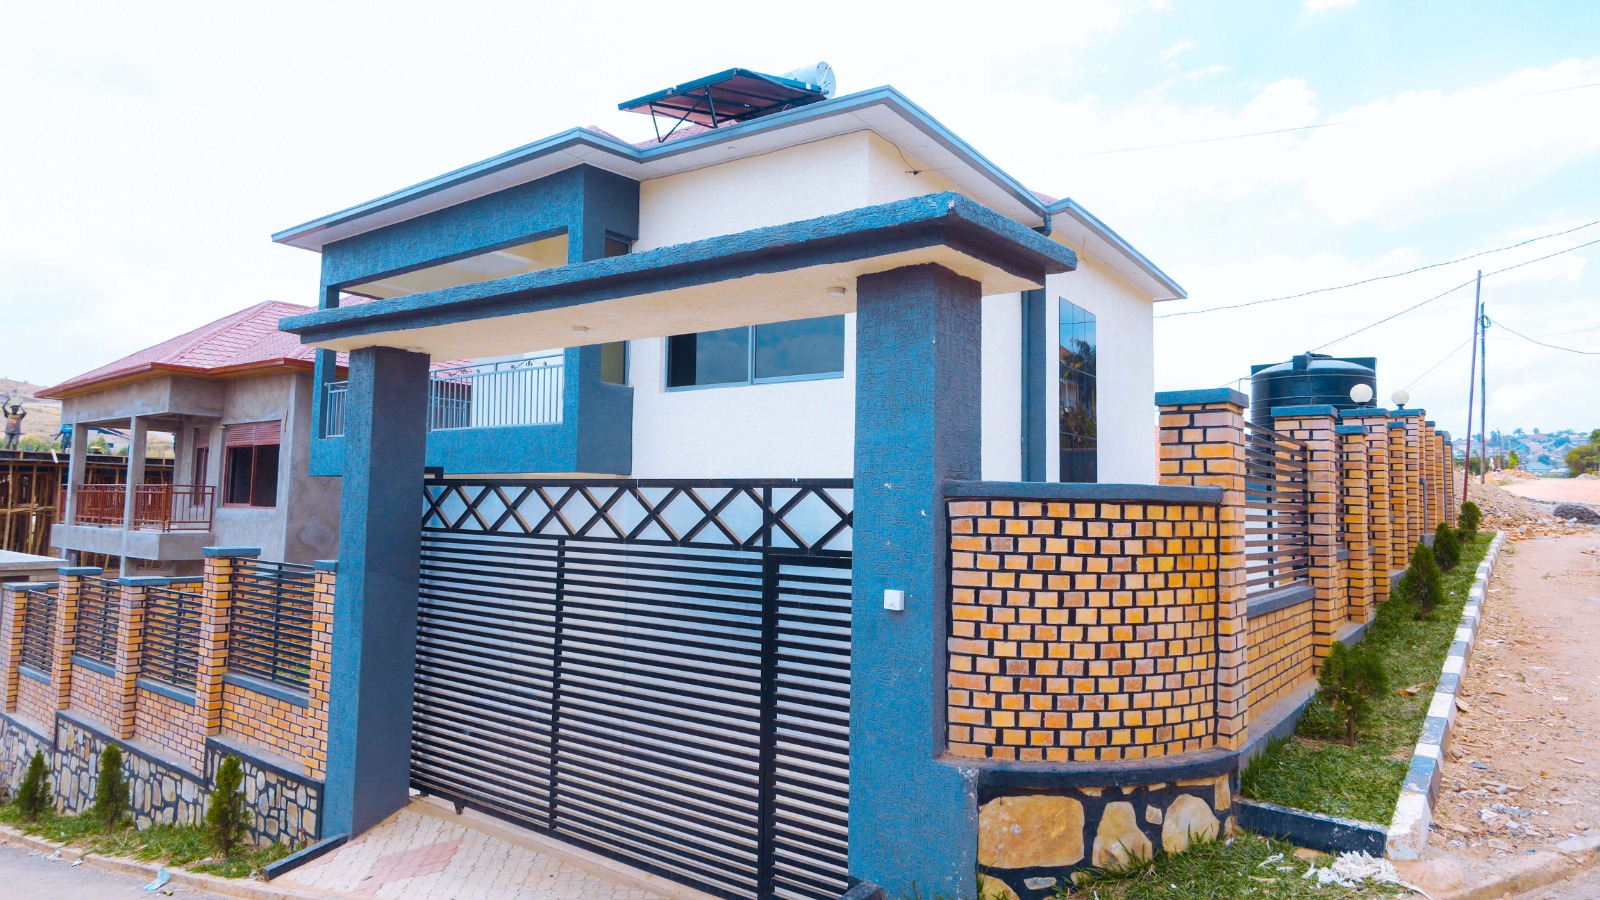 FF 093 Kibagabaga new and nice house for sales with beautiful view and good location in Kigali Rwanda